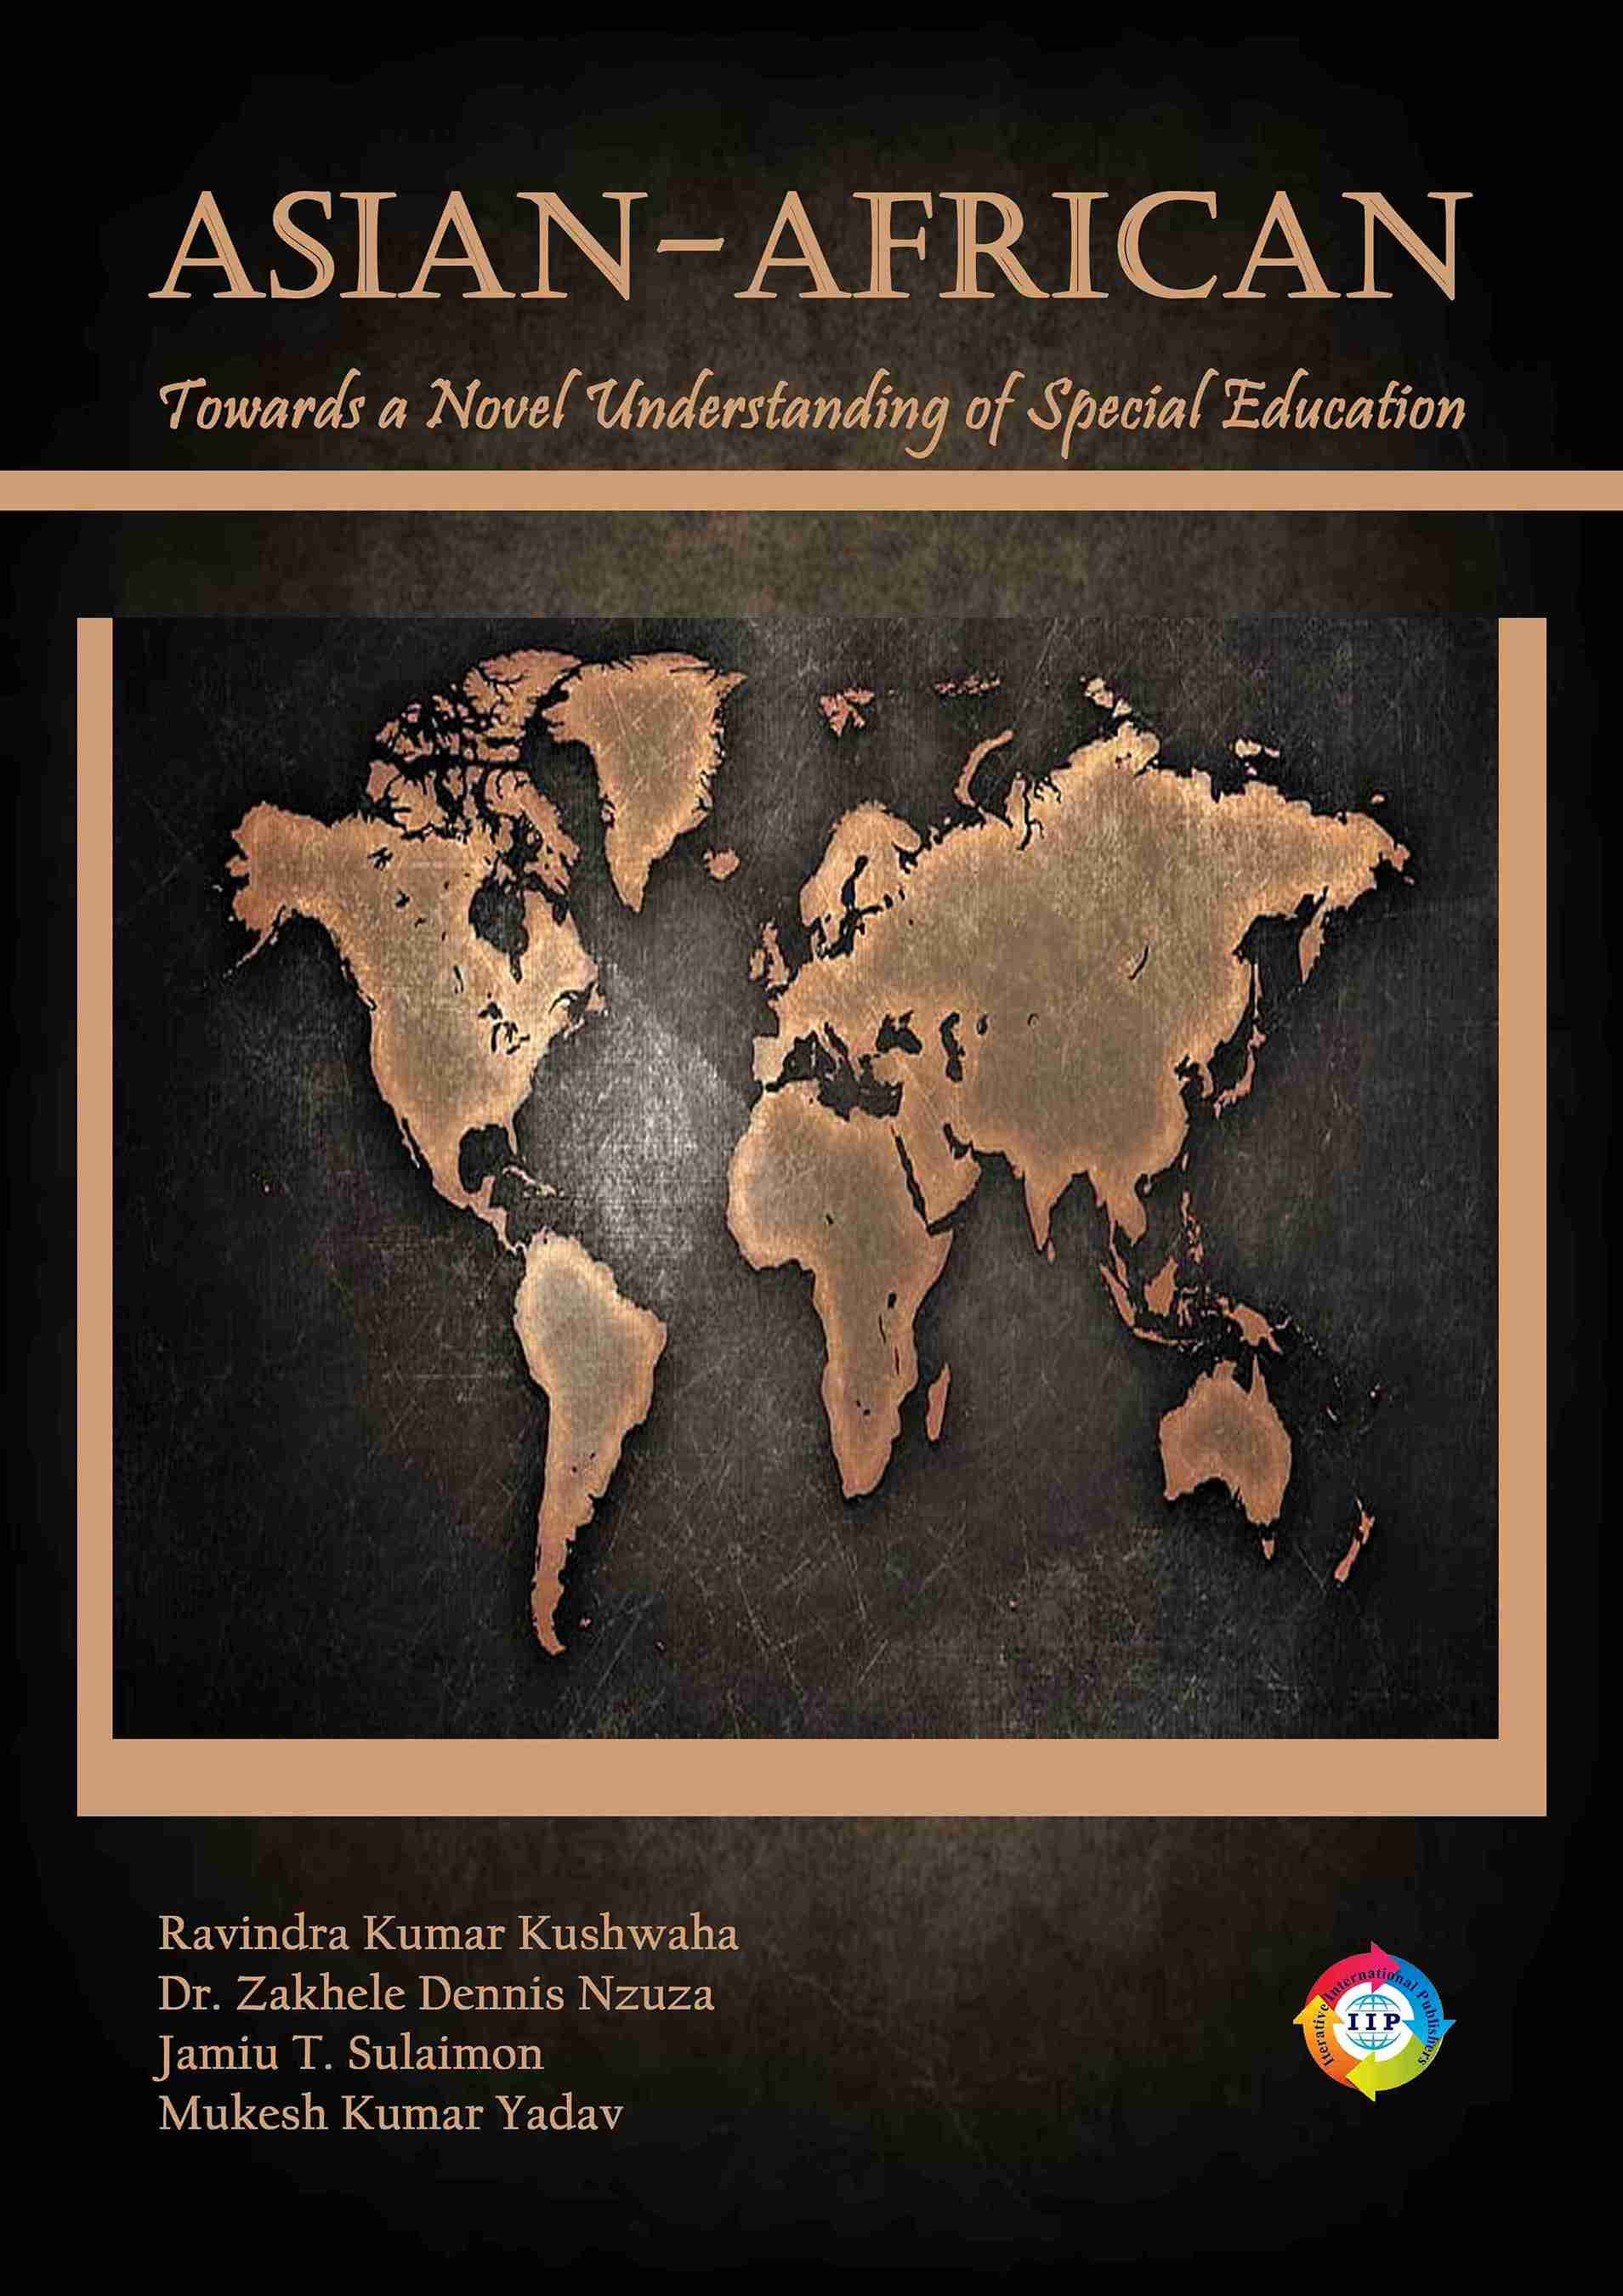 ASIAN-AFRICAN: TOWARDS A NOVEL UNDERSTANDING OF SPECIAL EDUCATION